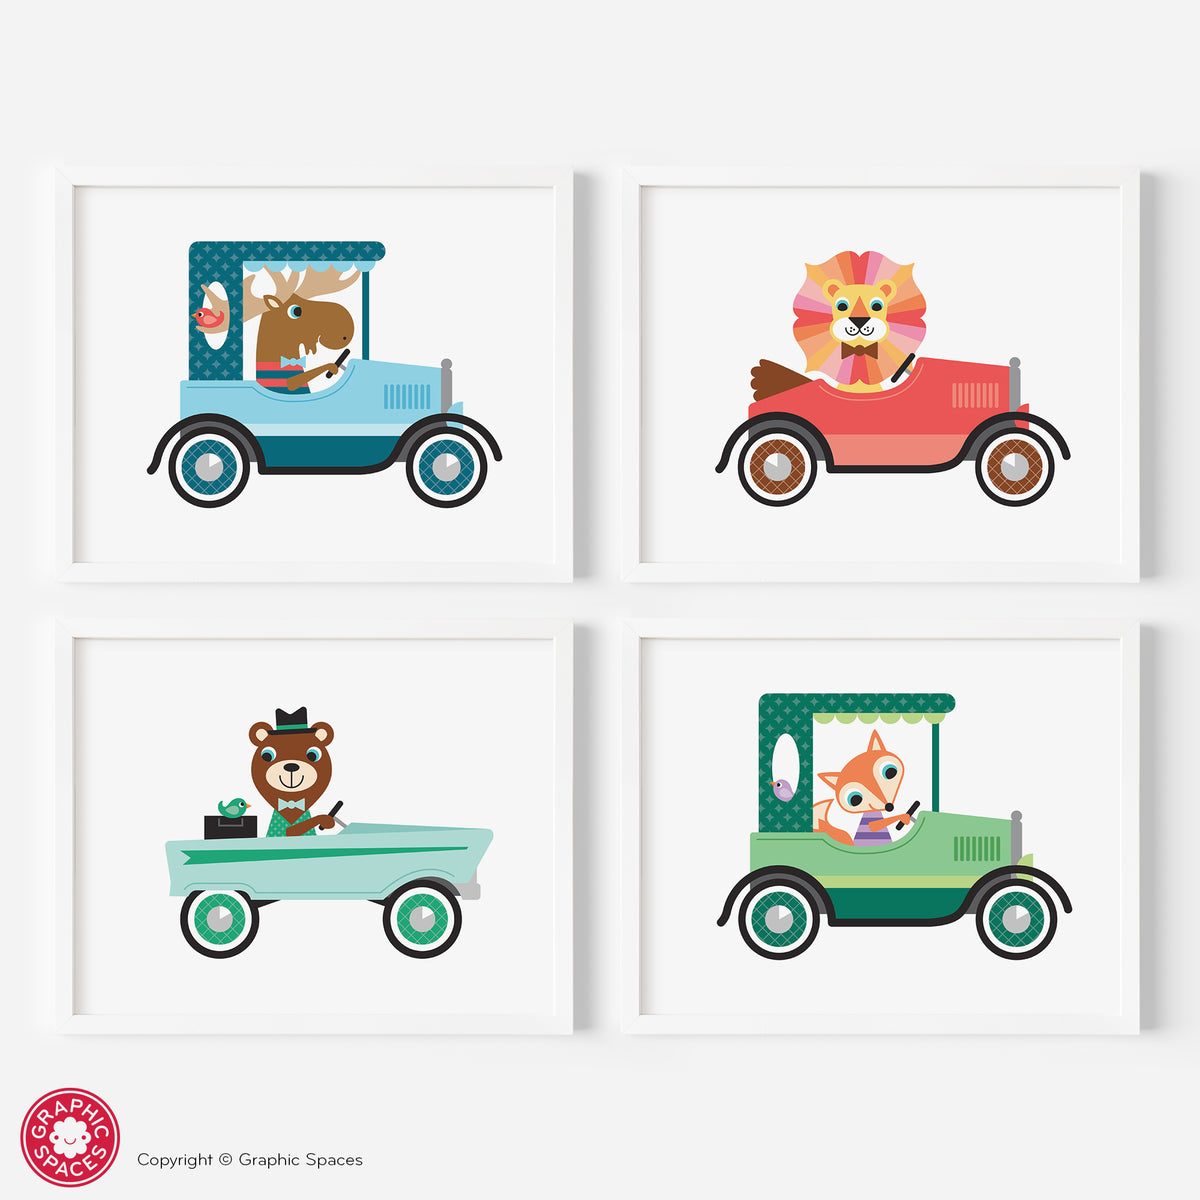 Animals in Cars Art Prints - Set of 4